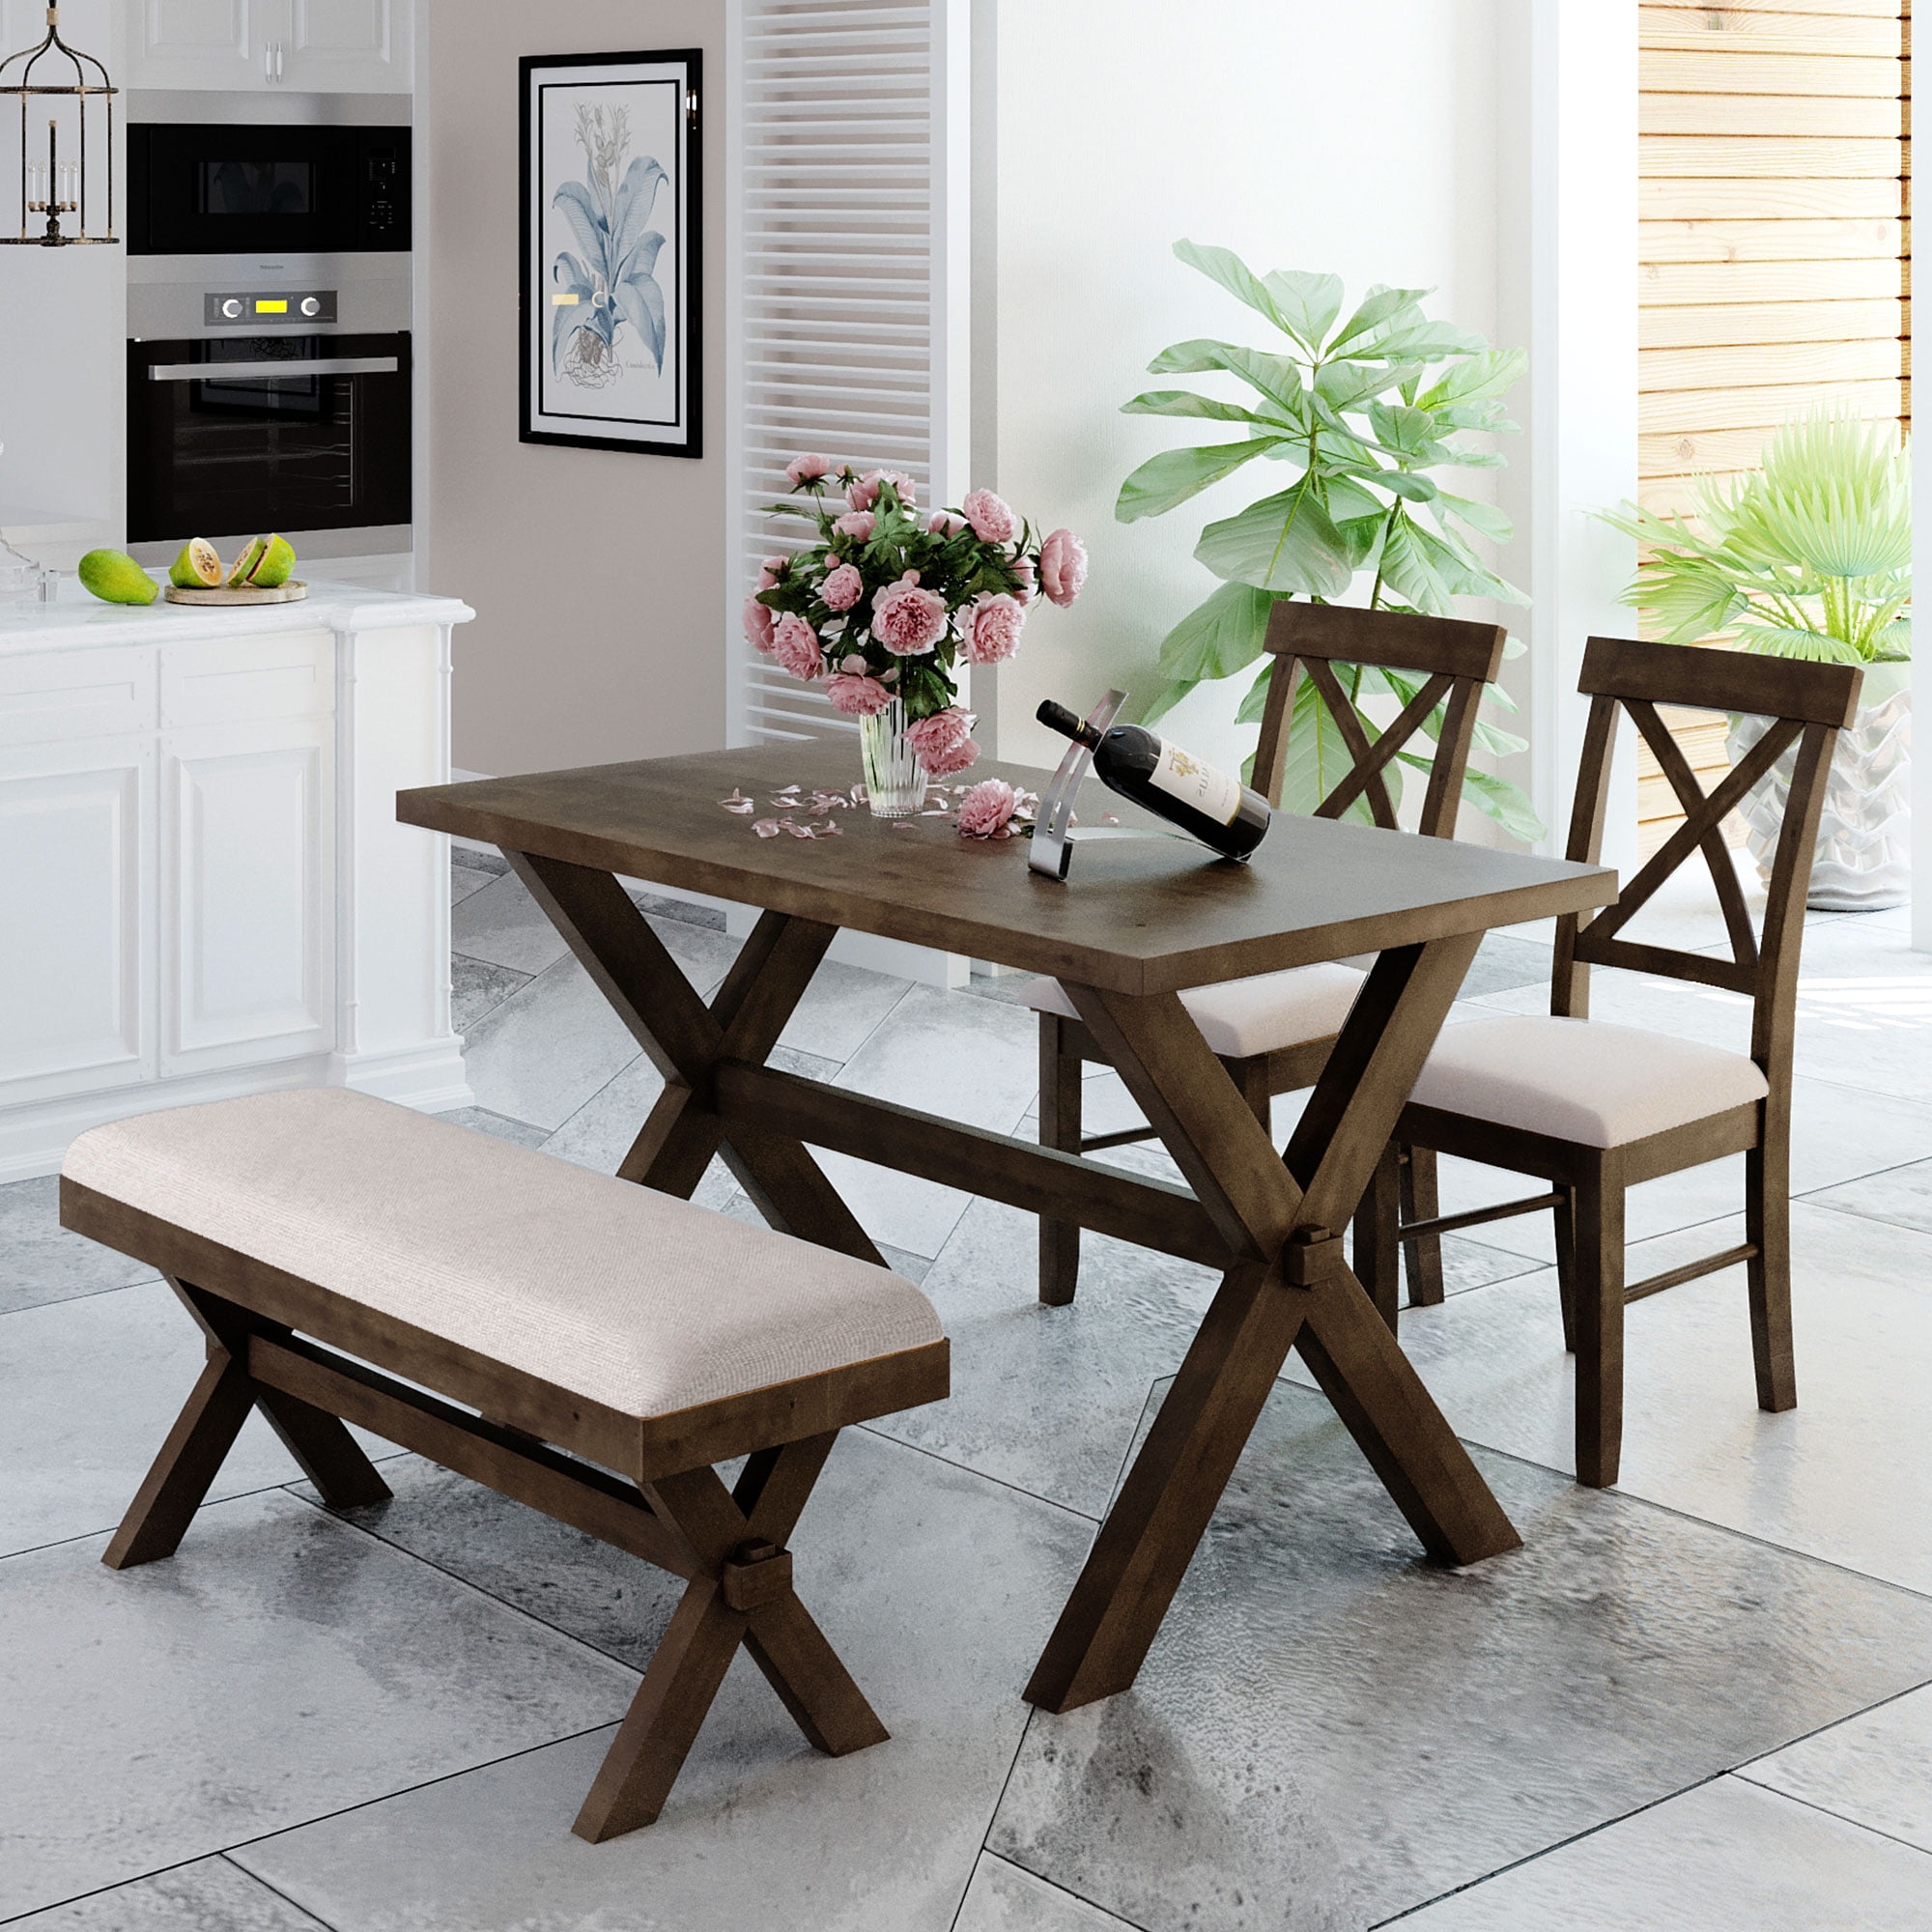 4 Pieces Farmhouse Rustic Wood Kitchen Dining Table Set with ...